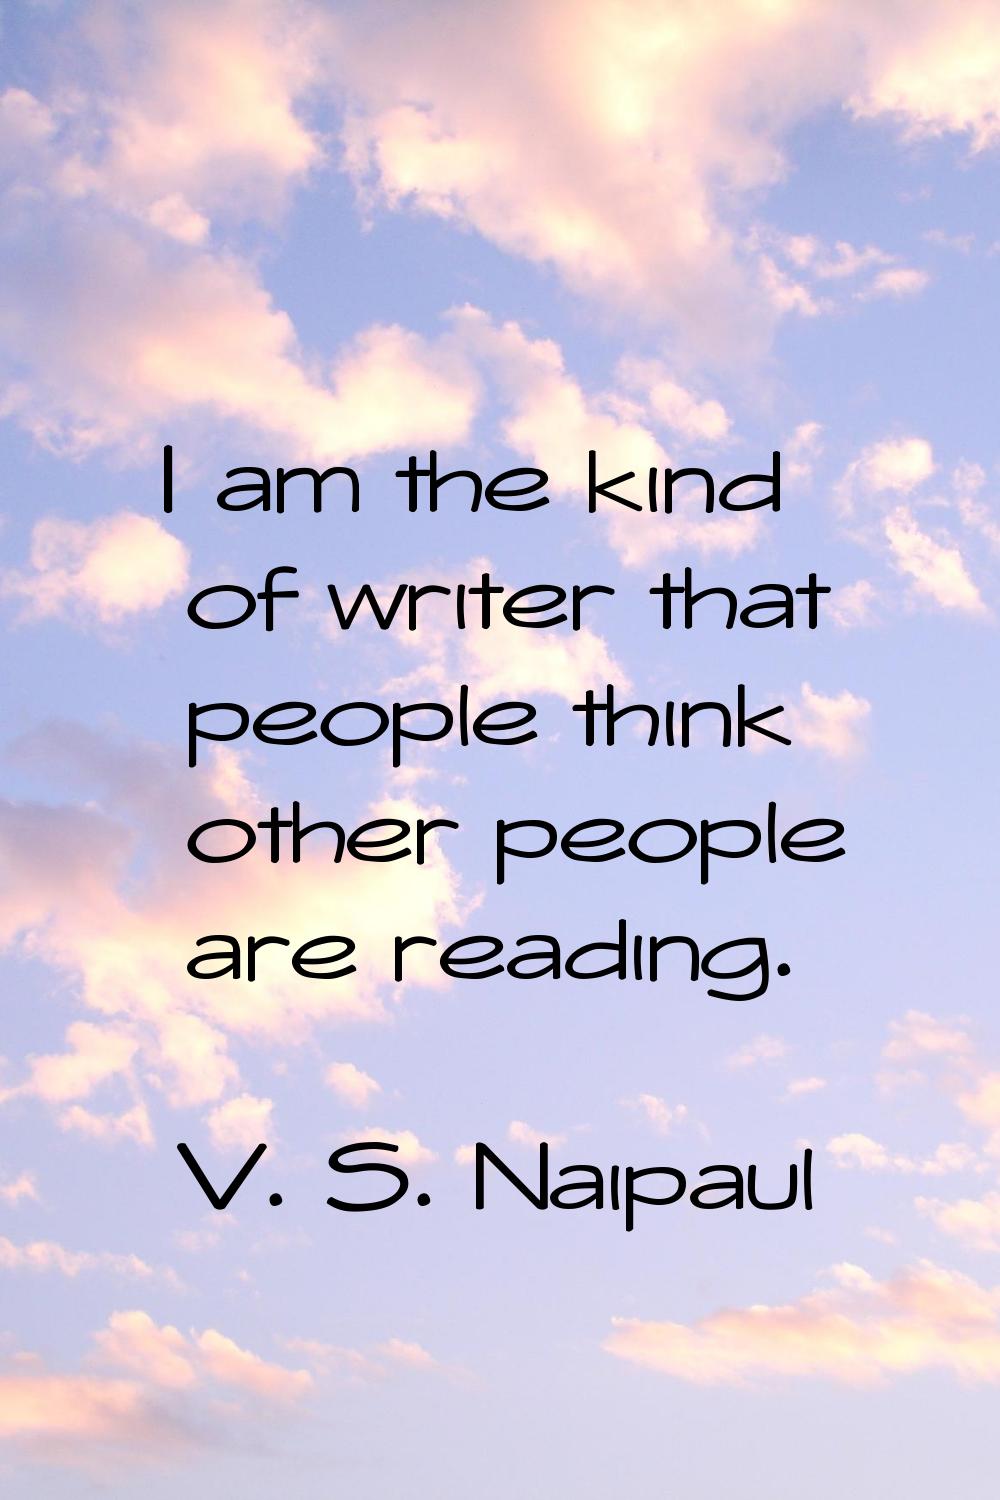 I am the kind of writer that people think other people are reading.